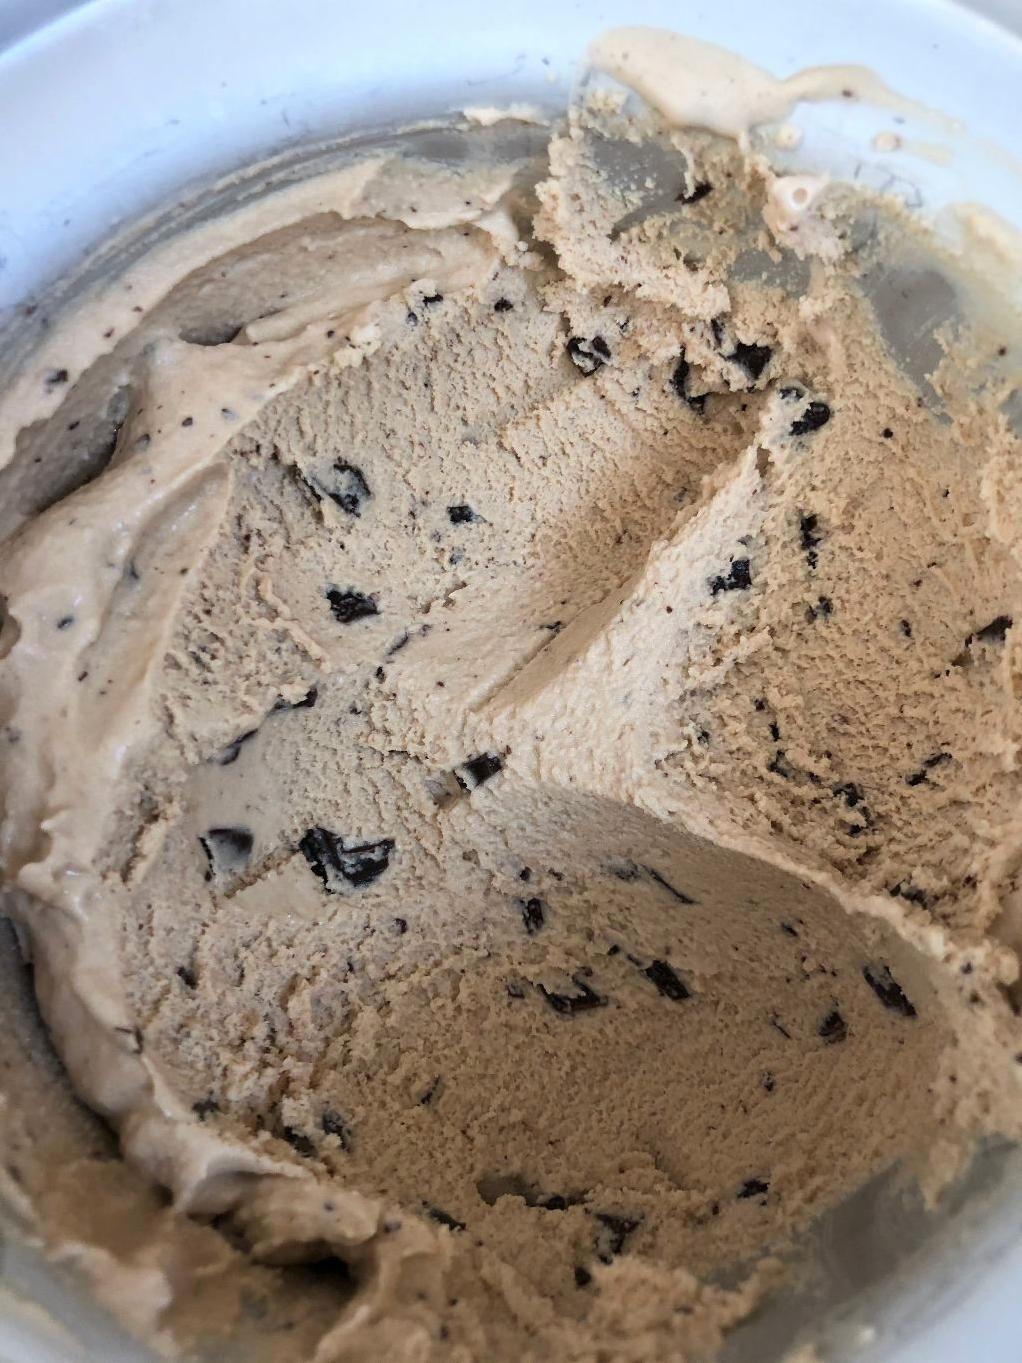  Get ready to be amazed at how this ice cream recipe balances the richness of cocoa and the bitterness of coffee.